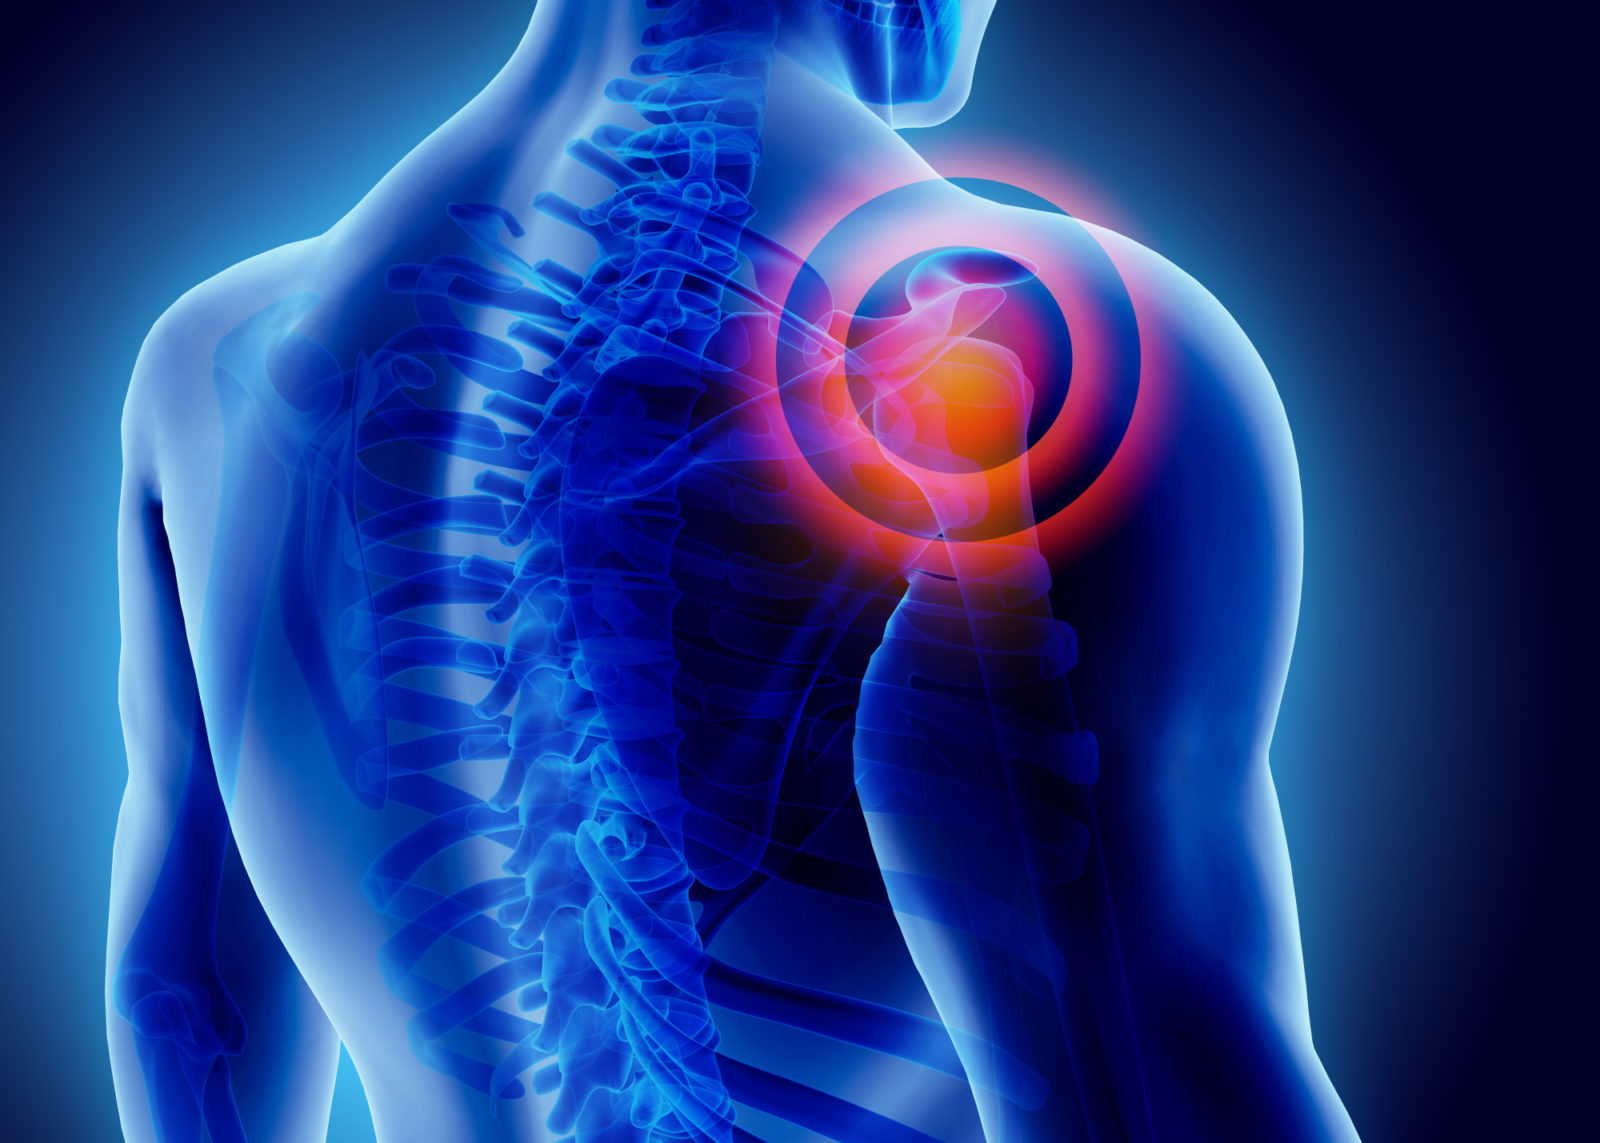 Shoulder Pain Relief and TreatmentJoint Pain Relief and